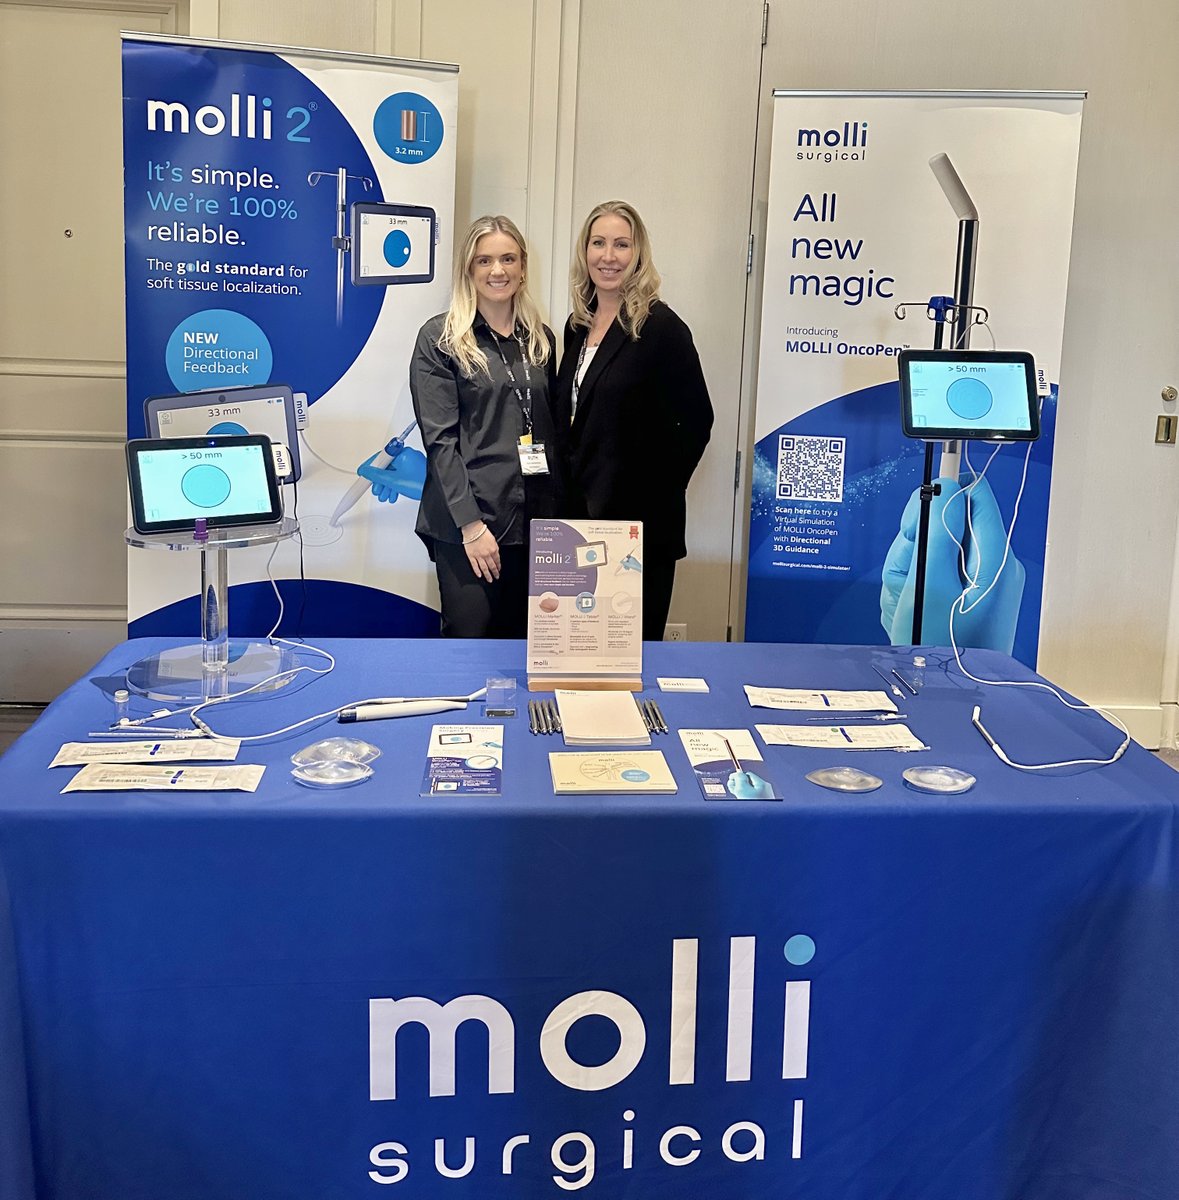 @MolliSurgicalis at The BC Surgical Society Annual Spring Meeting! Stop by our booth to learn more about MOLLI OncoPen™, our latest #innovation in soft tissue localization and meet our team members Ruth MacSweeney and Kelly Dawson. #MeetMOLLI #healthcare #innovation